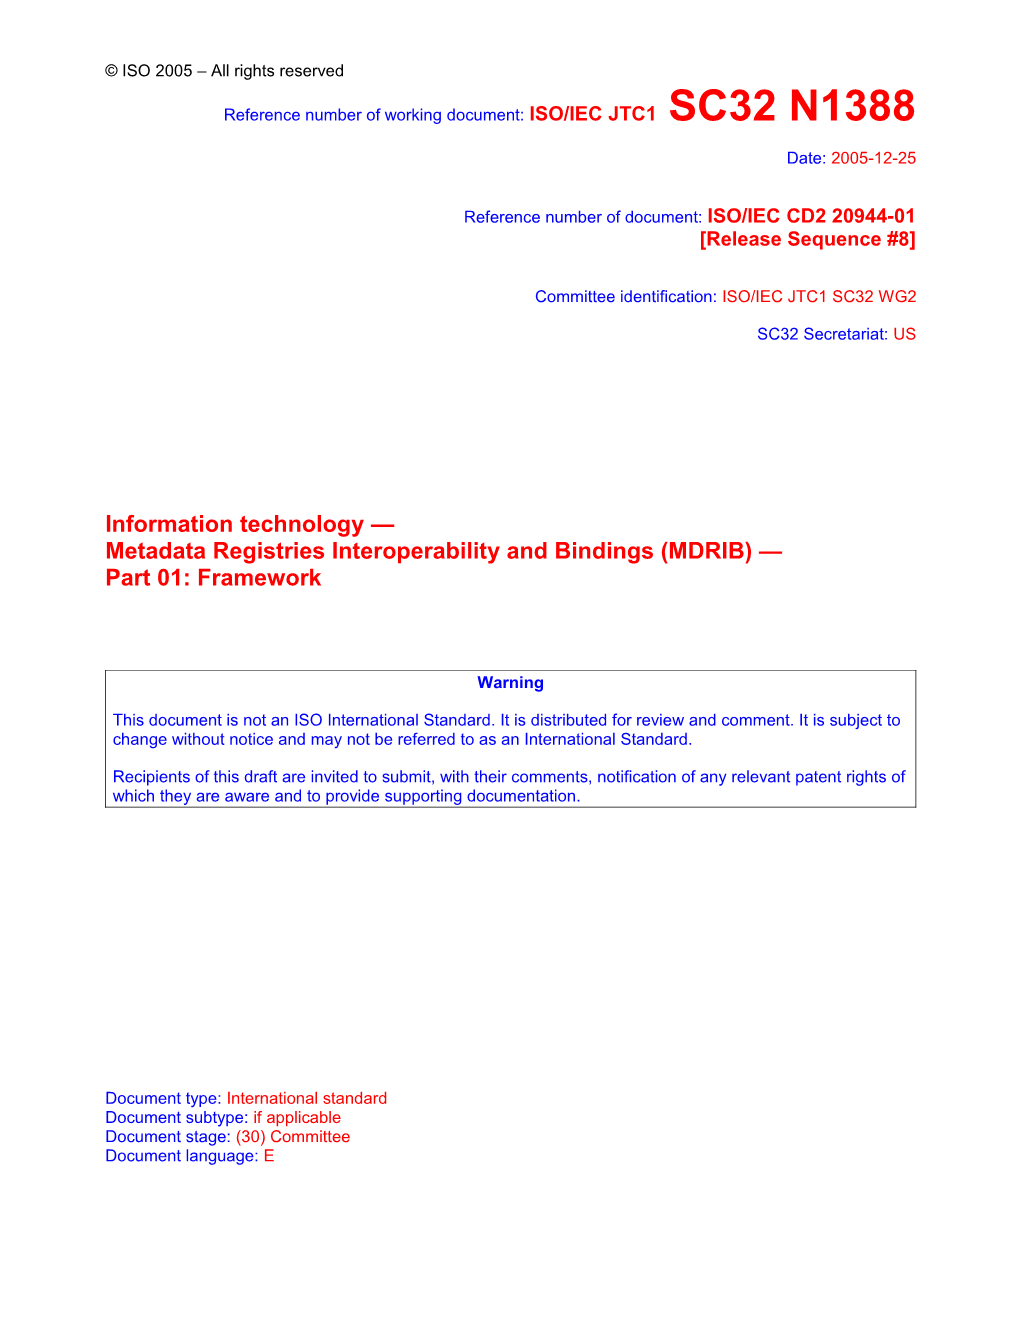 CD2 Text For: ISO/IEC 20944-01 Information Technology Metadata Interoperability and Bindings